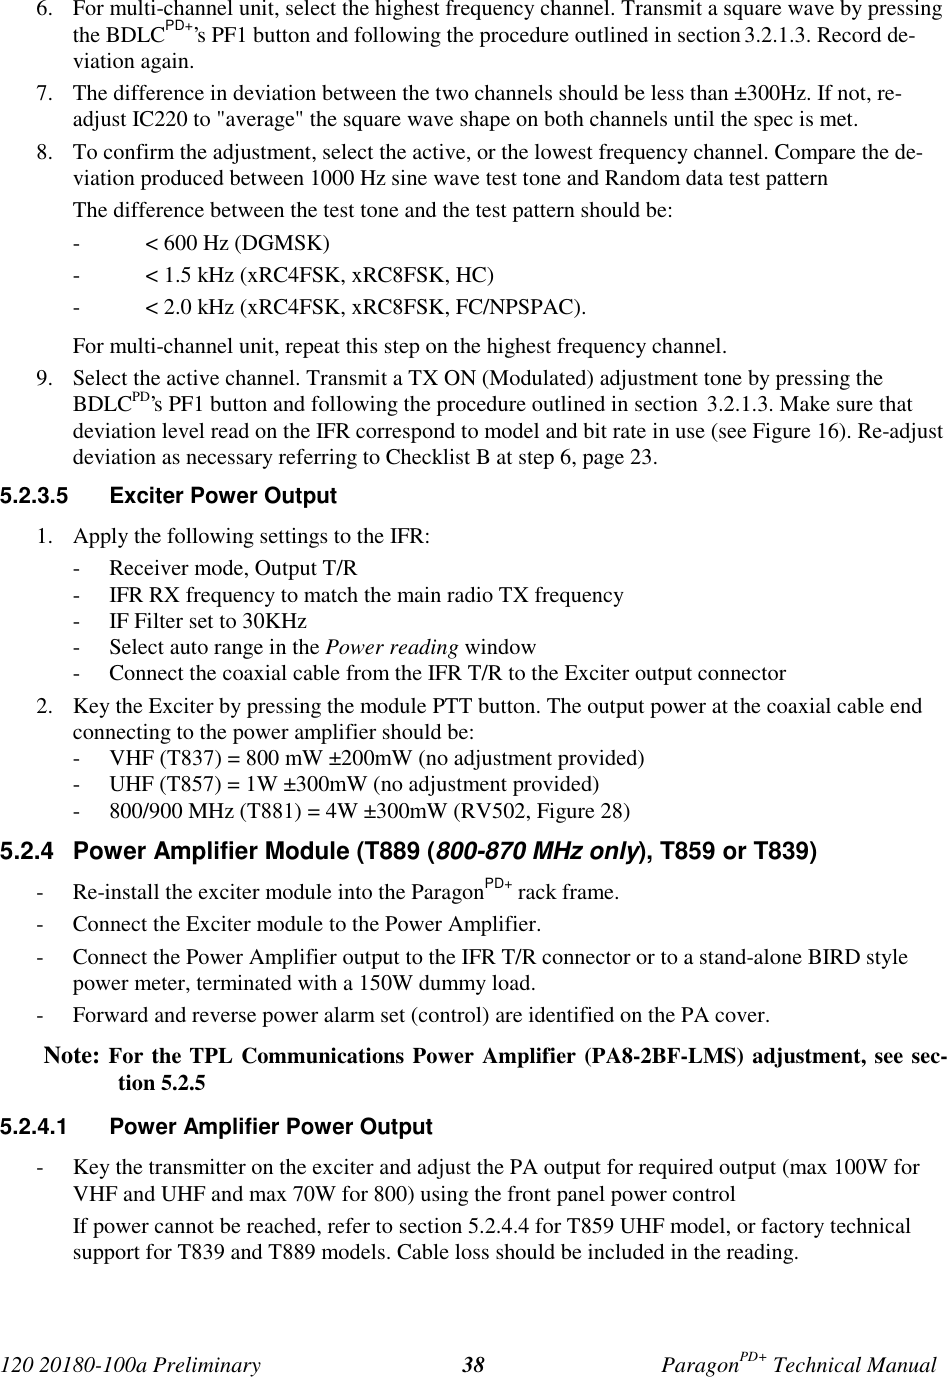 Page 45 of CalAmp Wireless Networks BDD4T85-1 Paragon/PD User Manual Parg PD  T100a Prelim